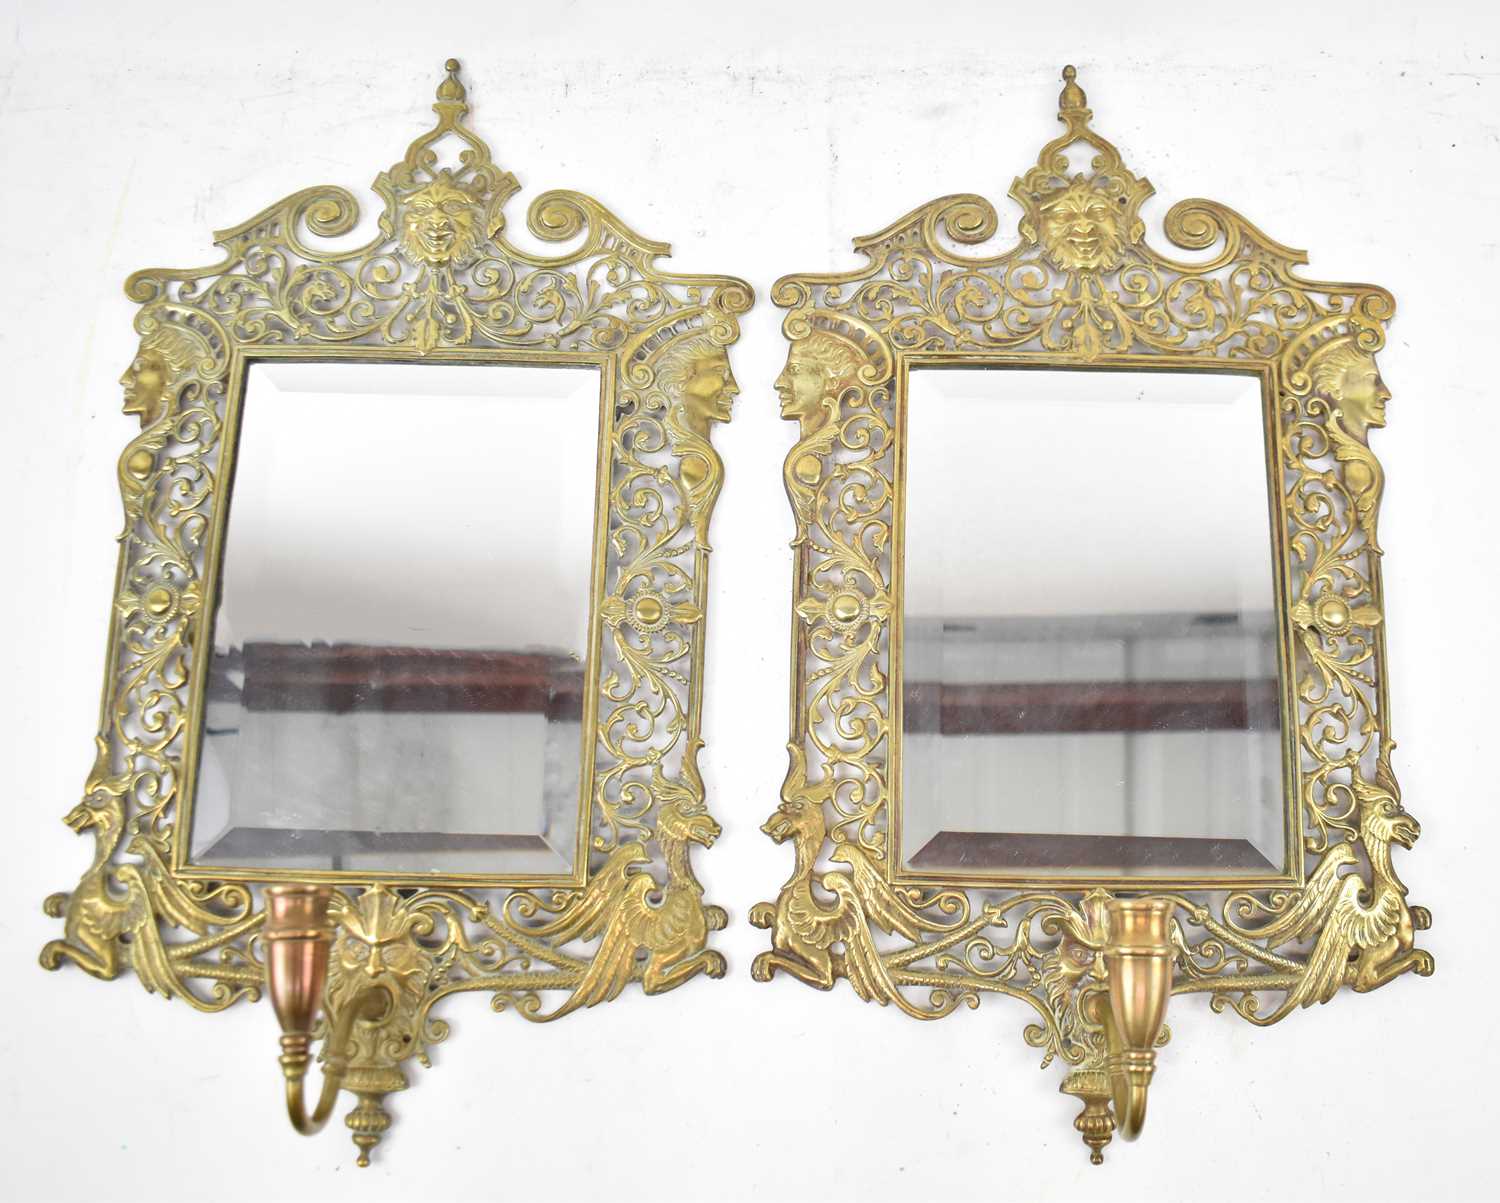 A pair of decorative pierced brass bevelled wall mirrors with single candle sconces, height 51 x